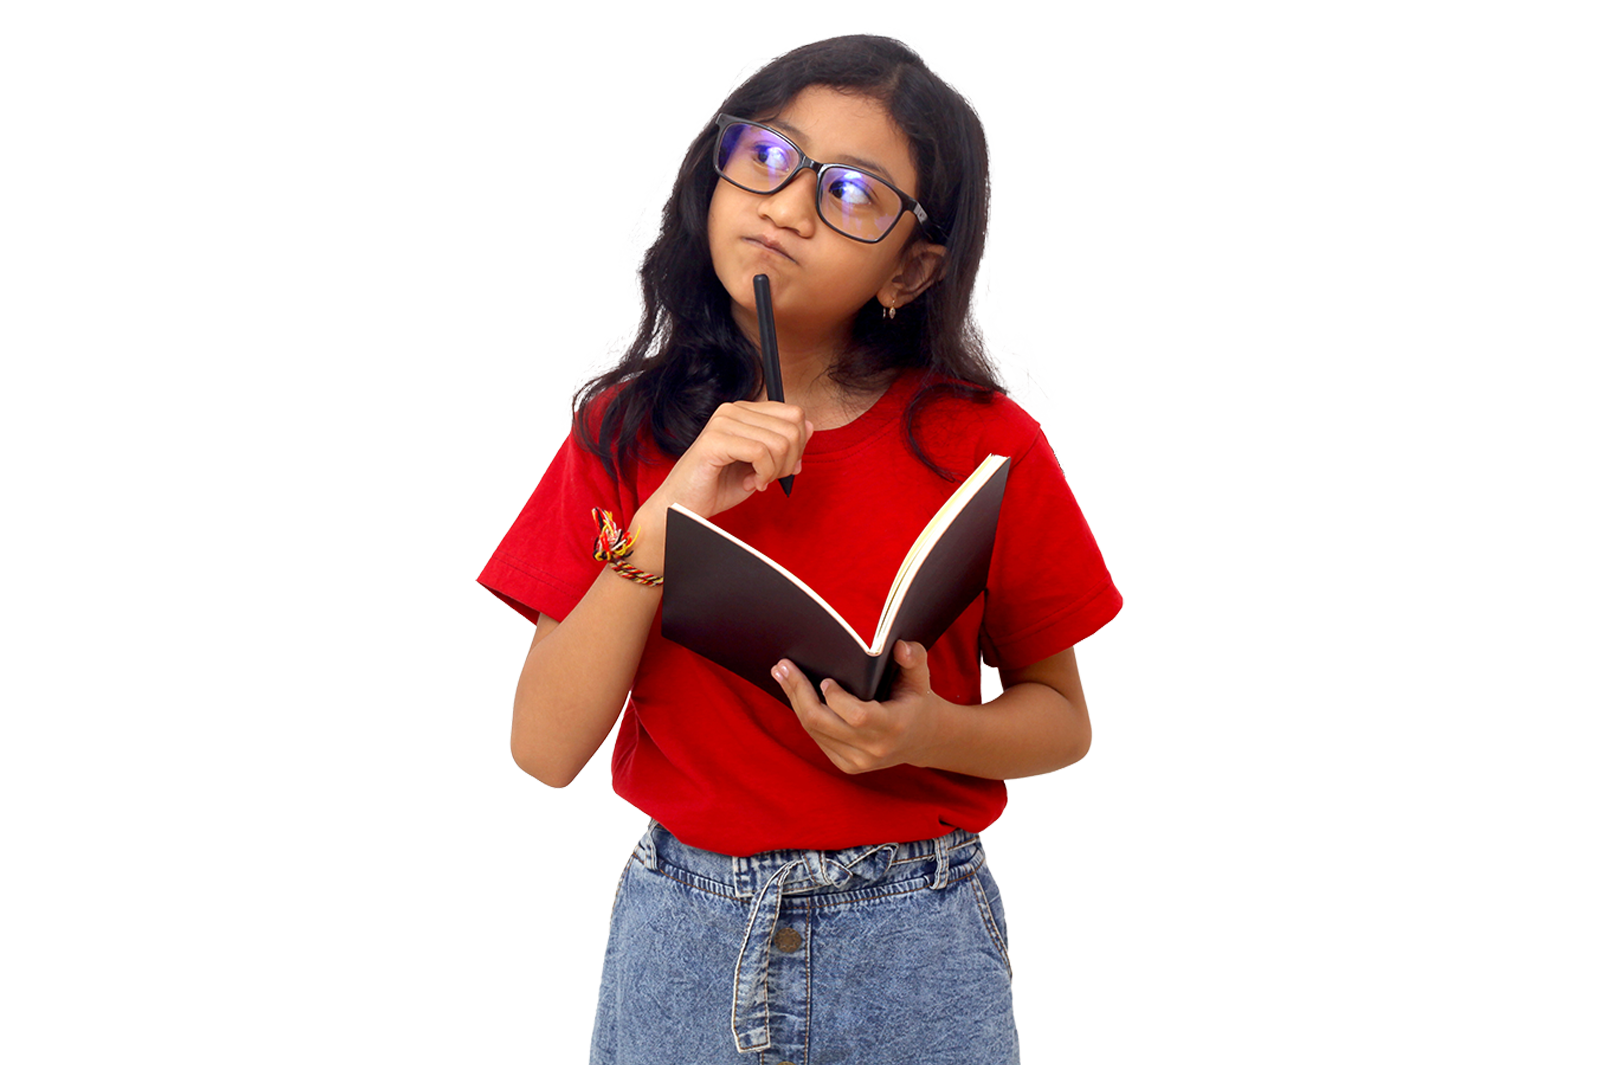 Girl with glasses thinking and holding a book